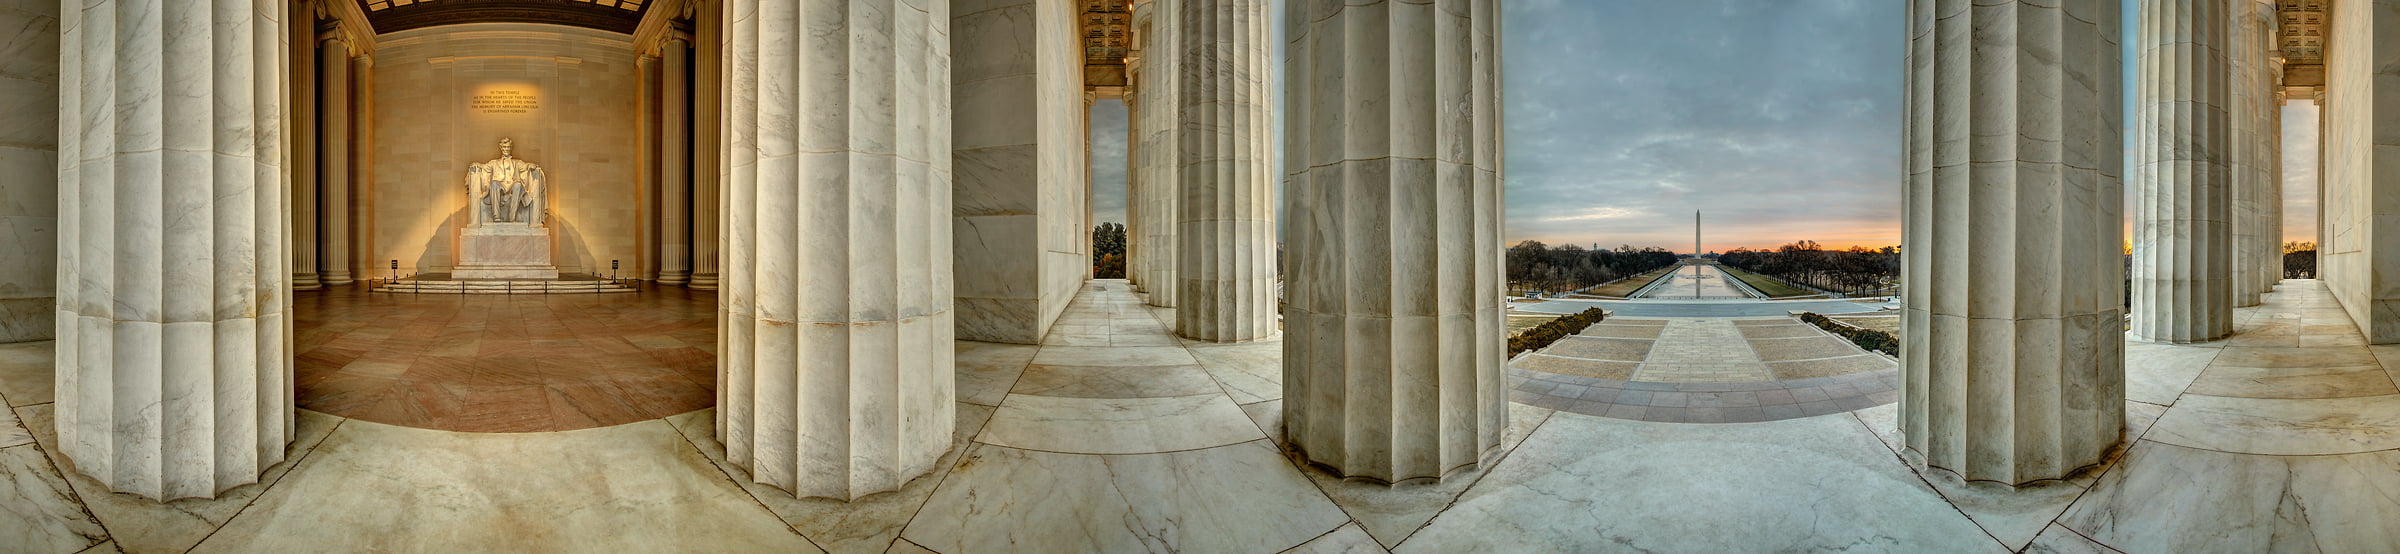 223 megapixels! A very high resolution, large-format VAST photo print of the washington DC monuments; panorama photograph created by Tim Lo Monaco in Lincoln Memorial, Washington, D.C.